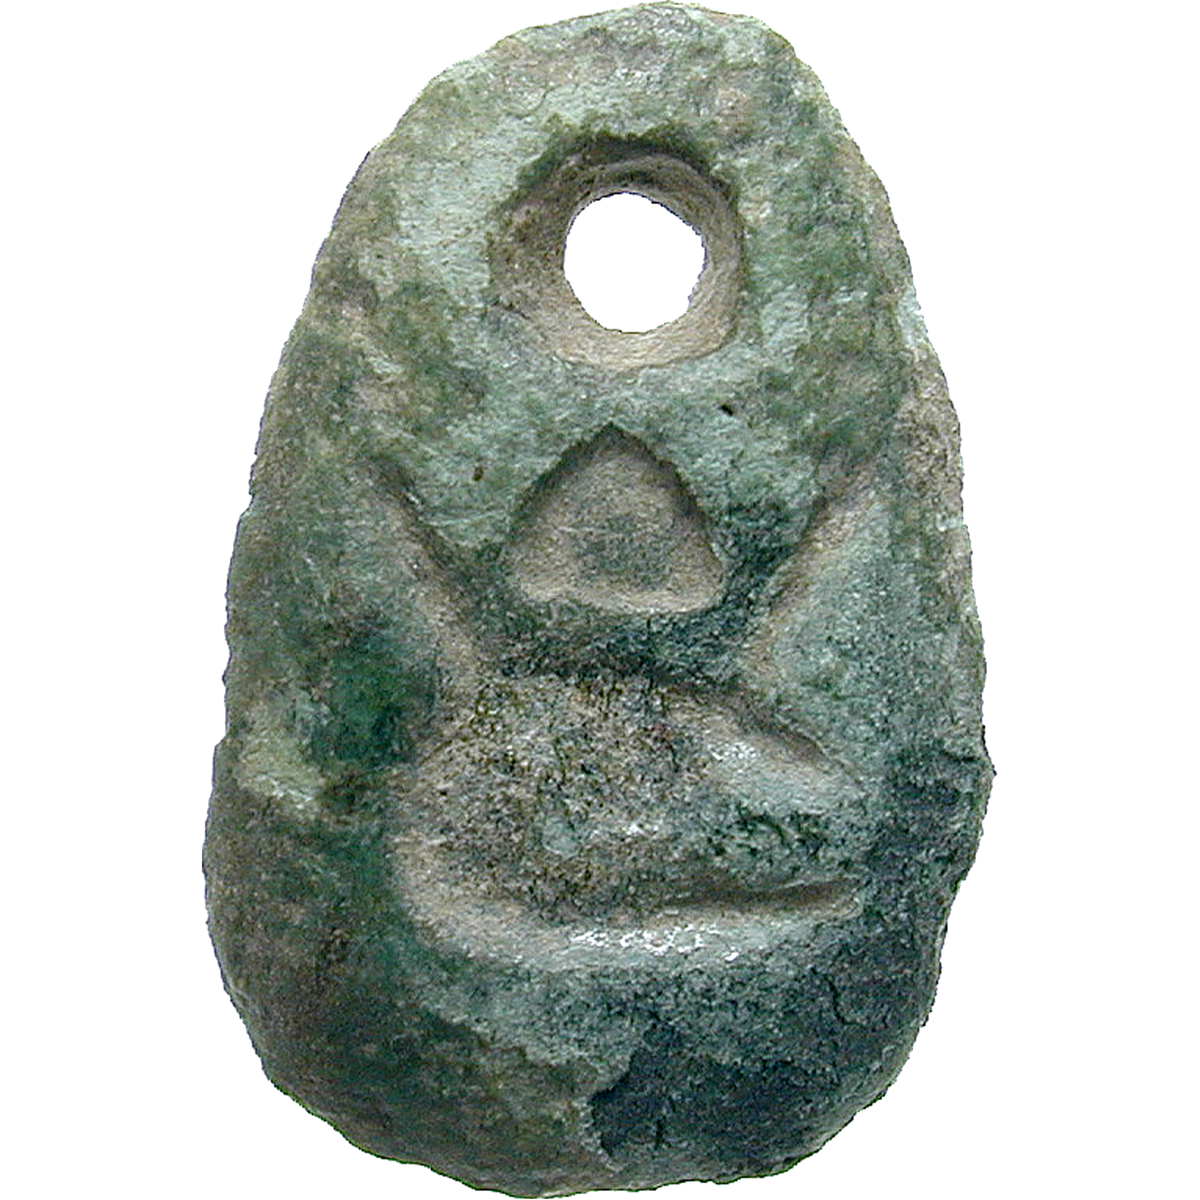 China, County of Wei, Bronze Cowrie Pao (obverse)